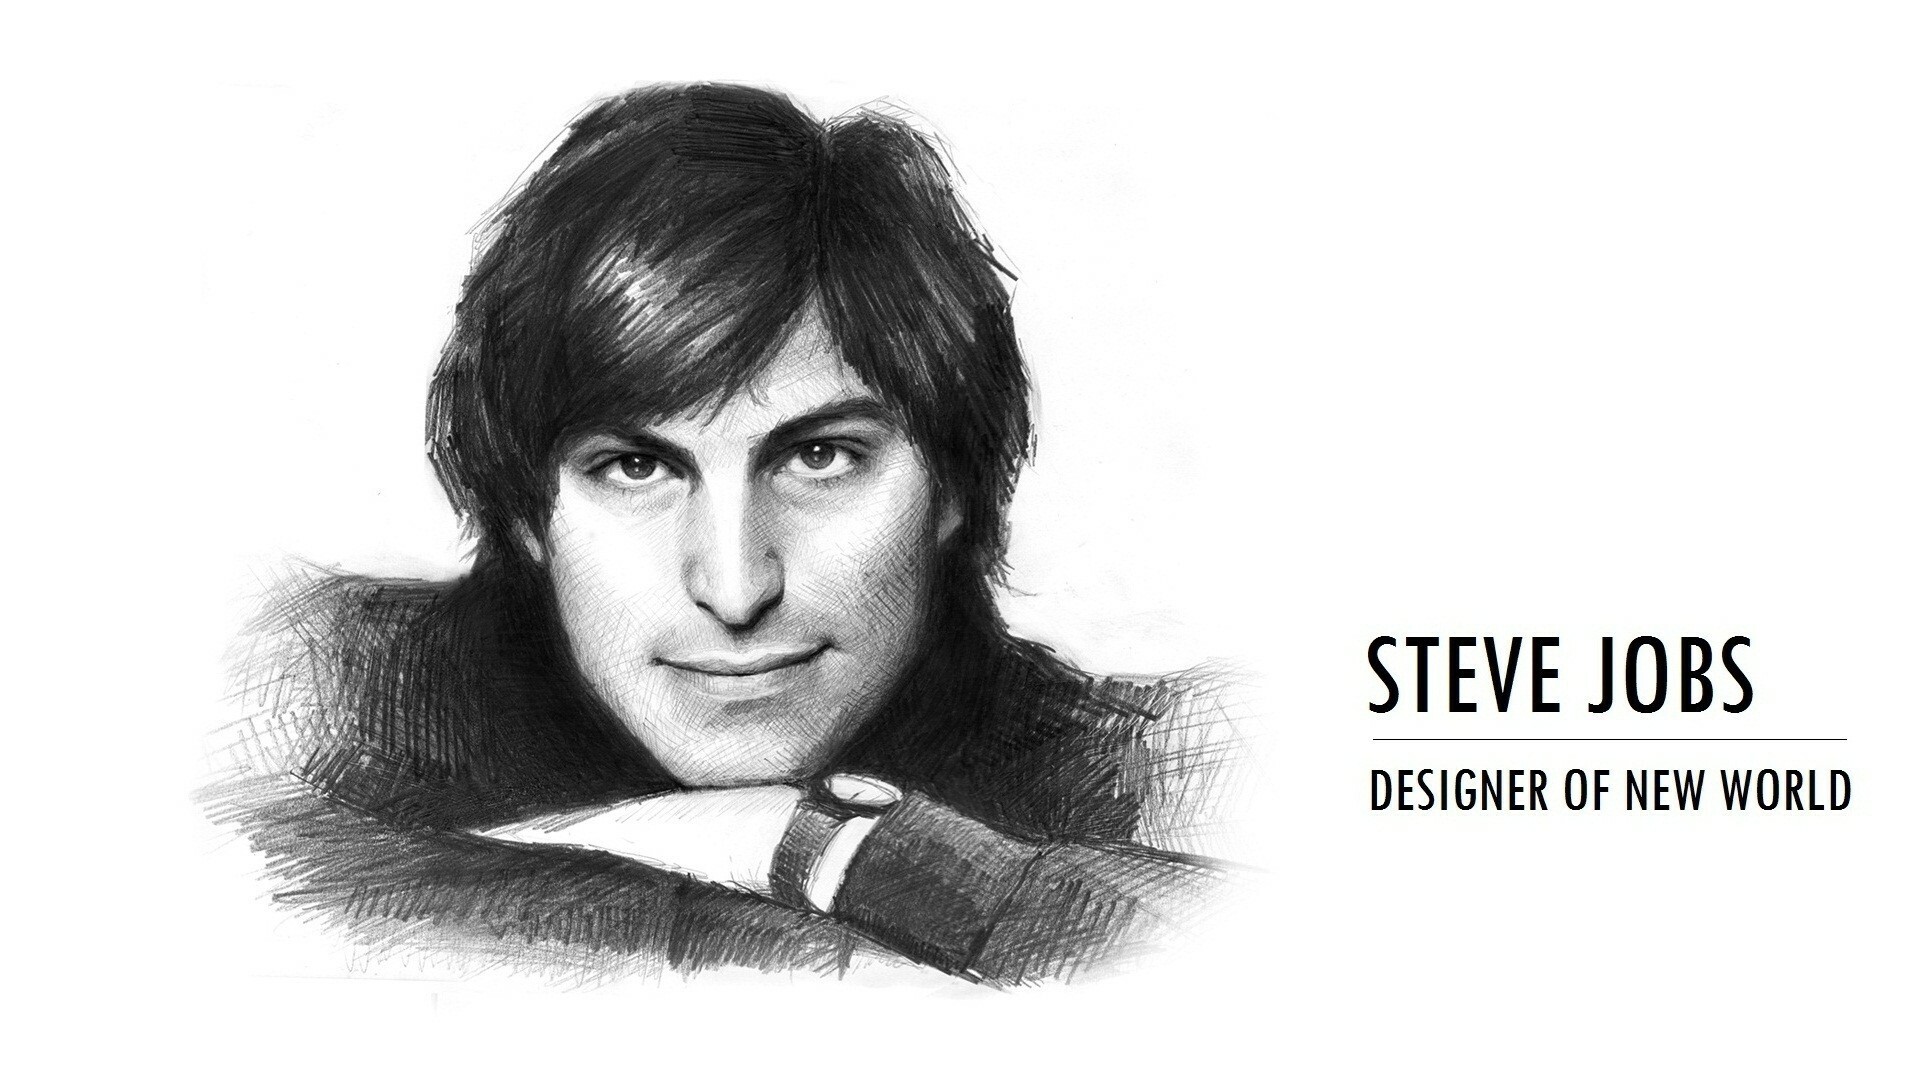 Steve Jobs: One of the duo who began Apple Computer in 1976, Monochrome, Illustration. 1920x1080 Full HD Background.